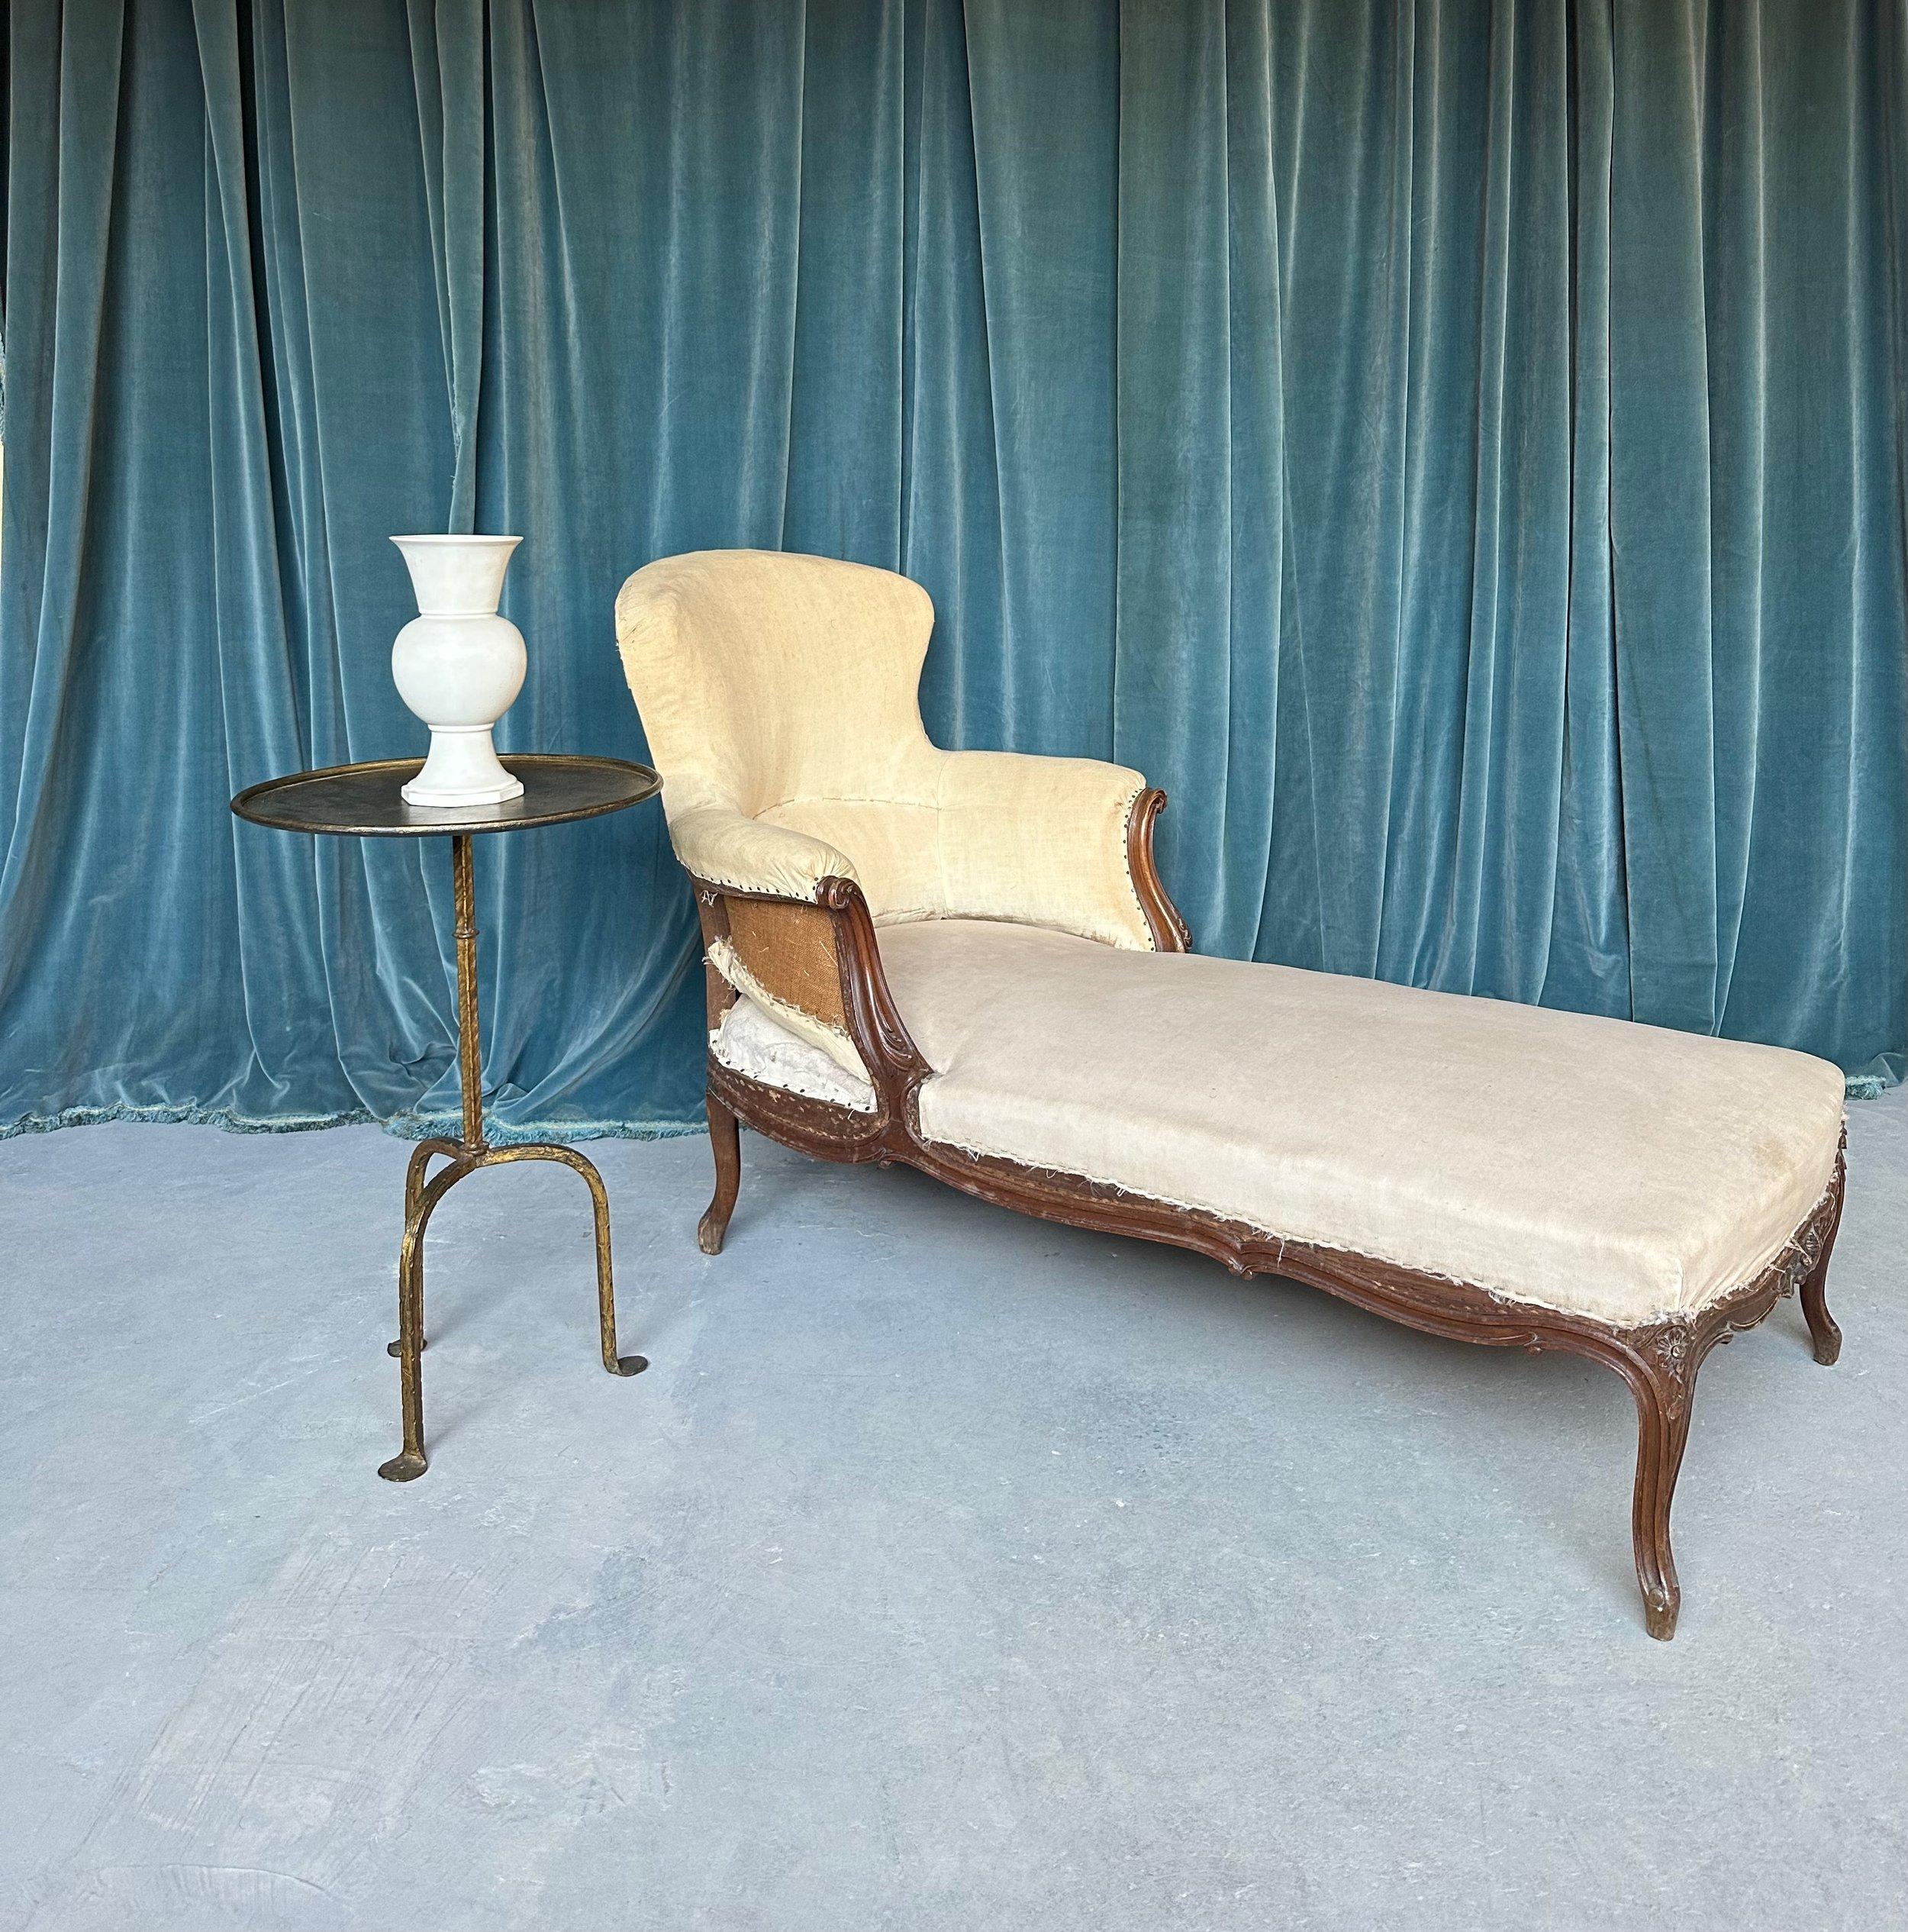 Napoleon III French 19th C. Chaise Longue with Carved Fruitwood Frame For Sale